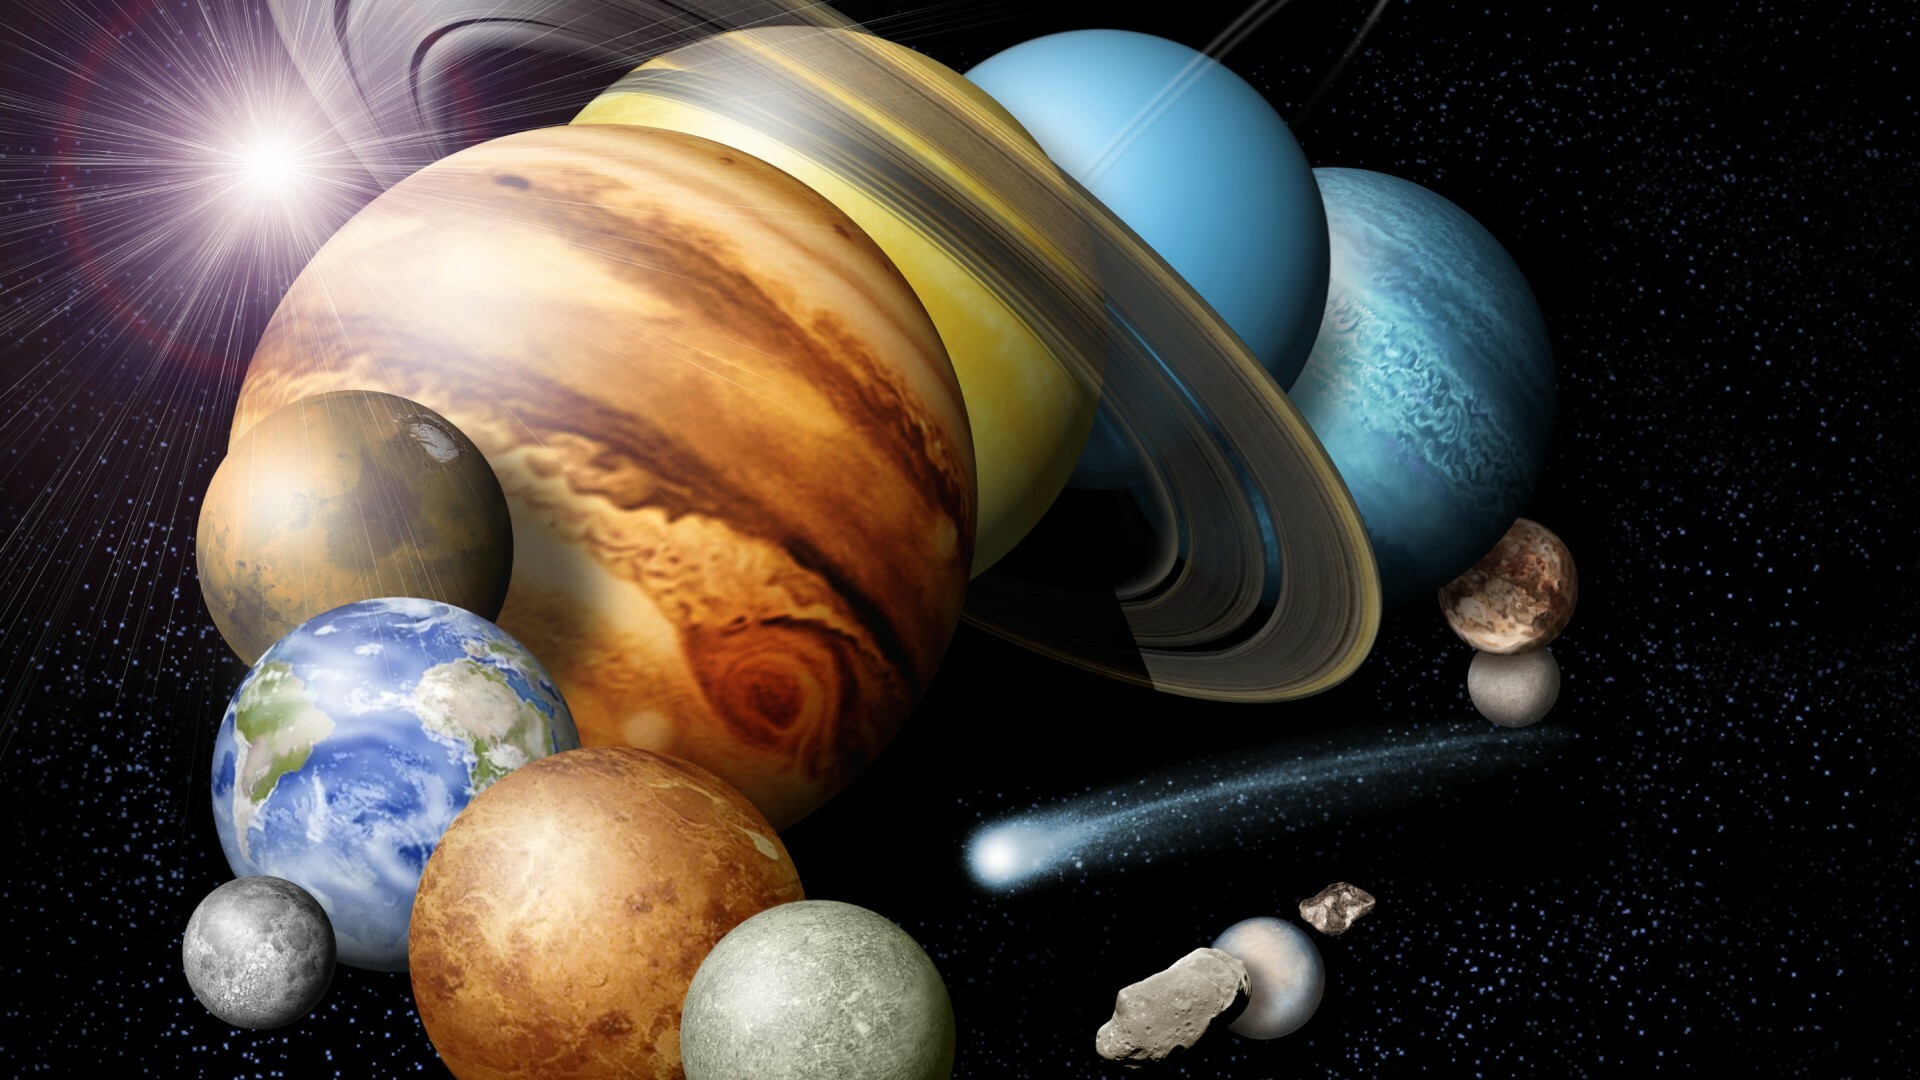 Solar System: Planets bound by gravity to the Sun, The star. 1920x1080 Full HD Wallpaper.